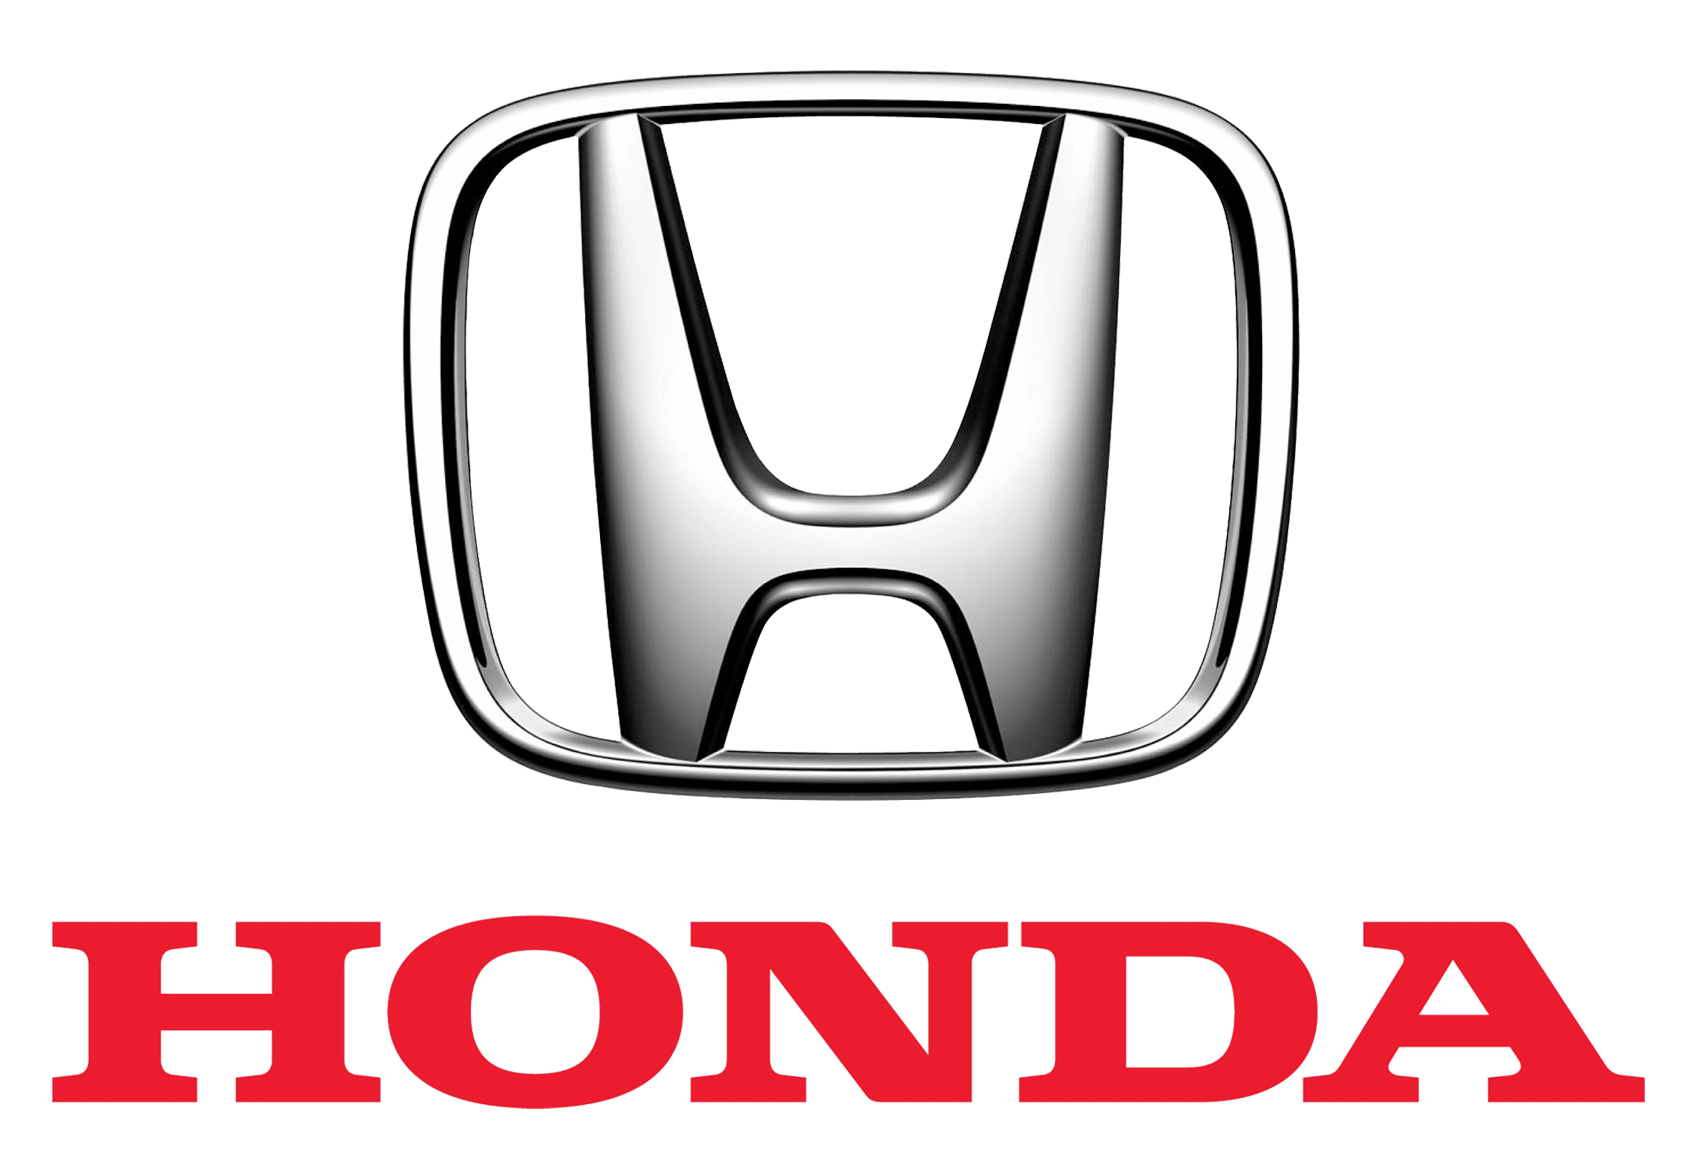 Honda Logo - The Letter H inside a square, with the word Honda below.